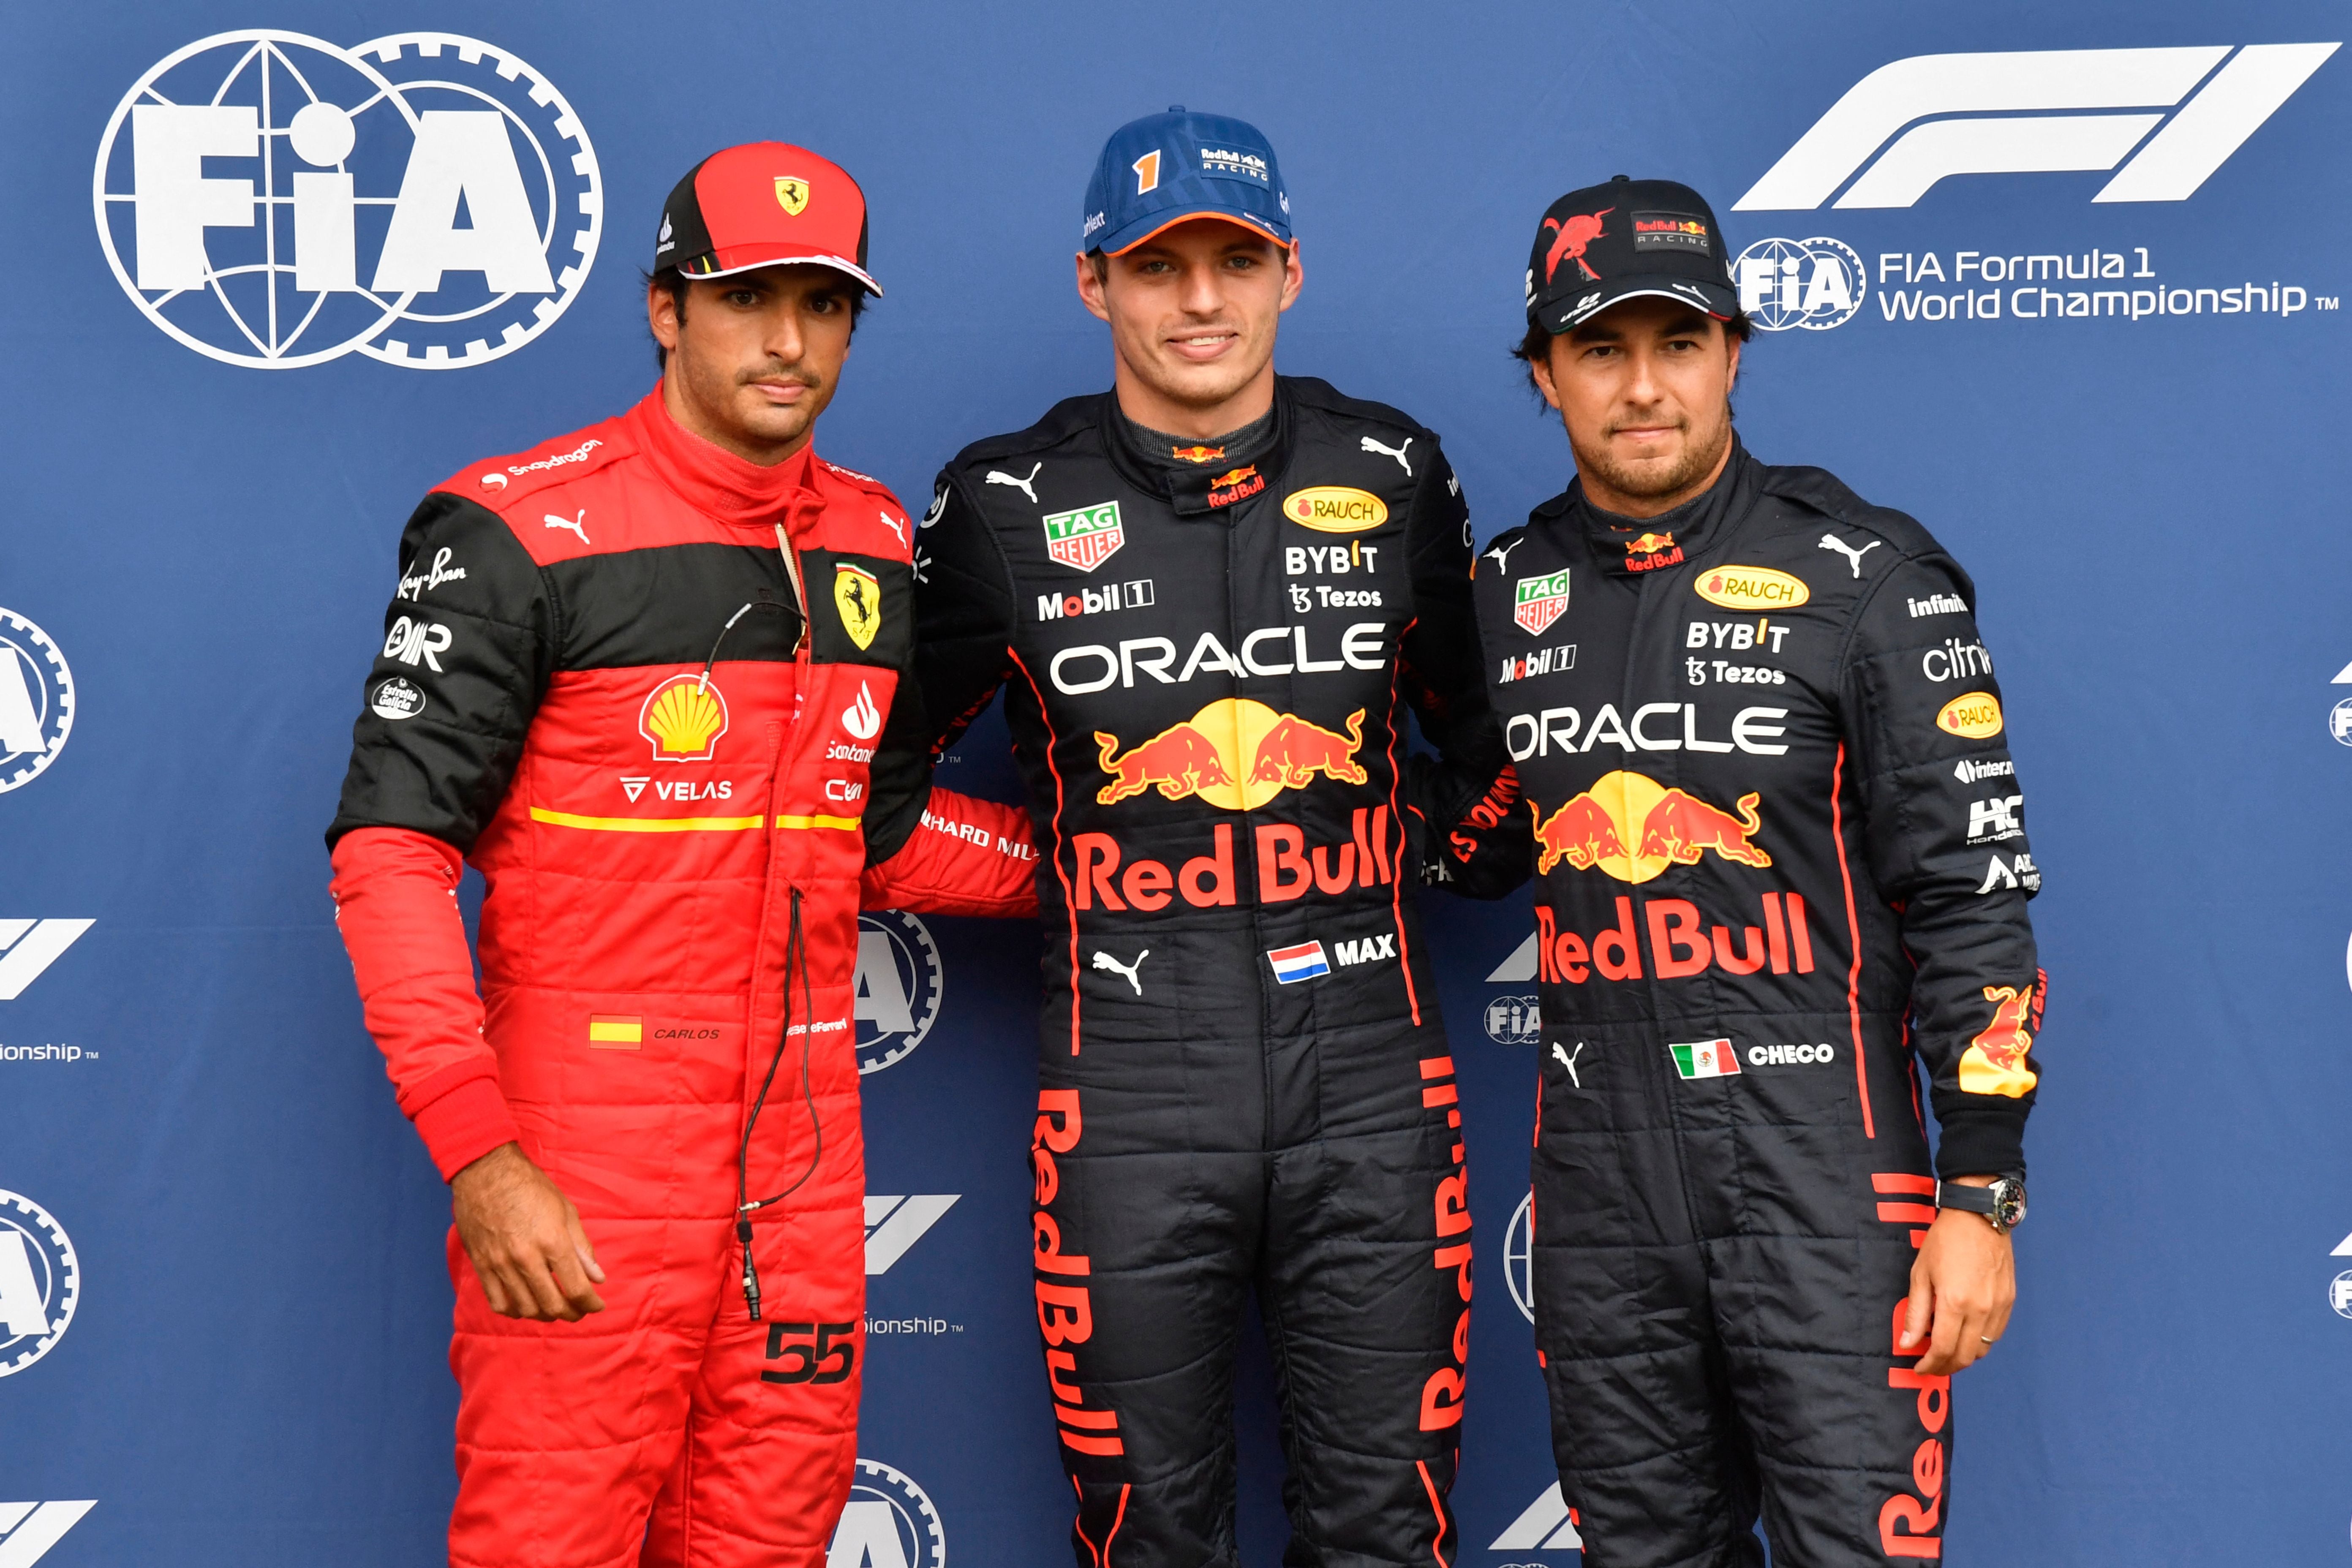 Max Verstappen topped the timesheets but Carlos Sainz will start on pole